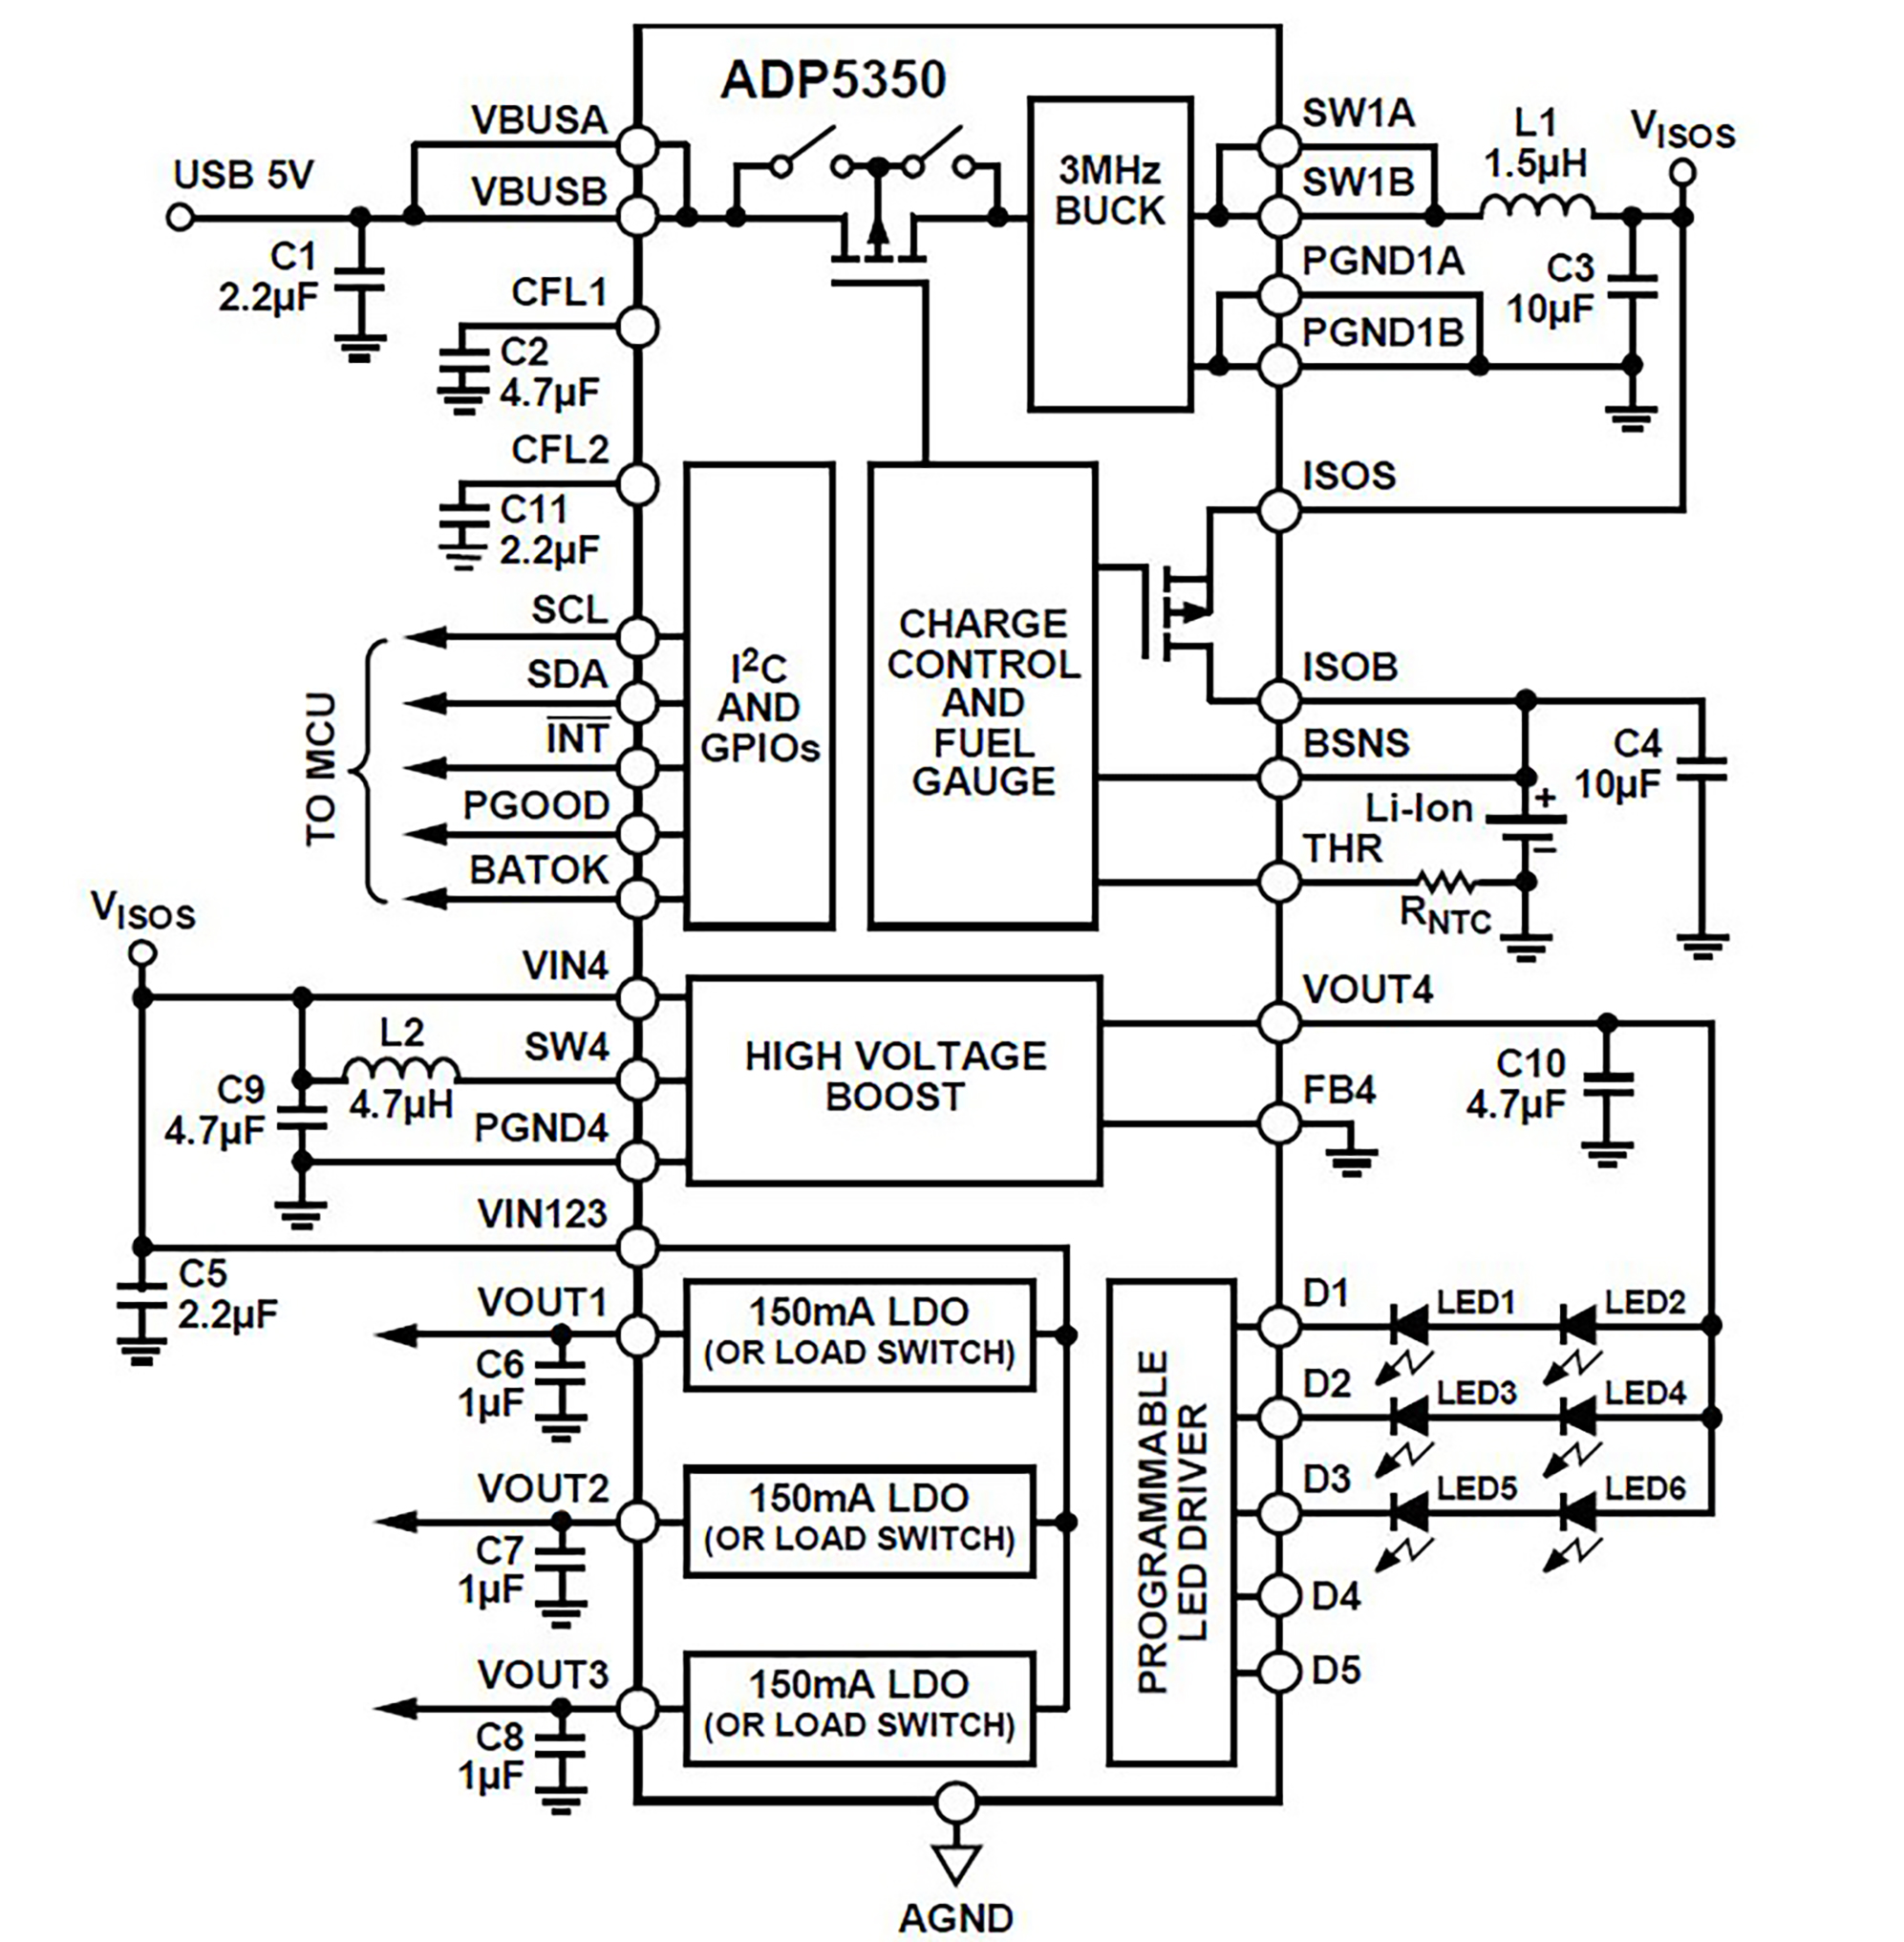 power-semiconductors-Analog-Devices-fig3